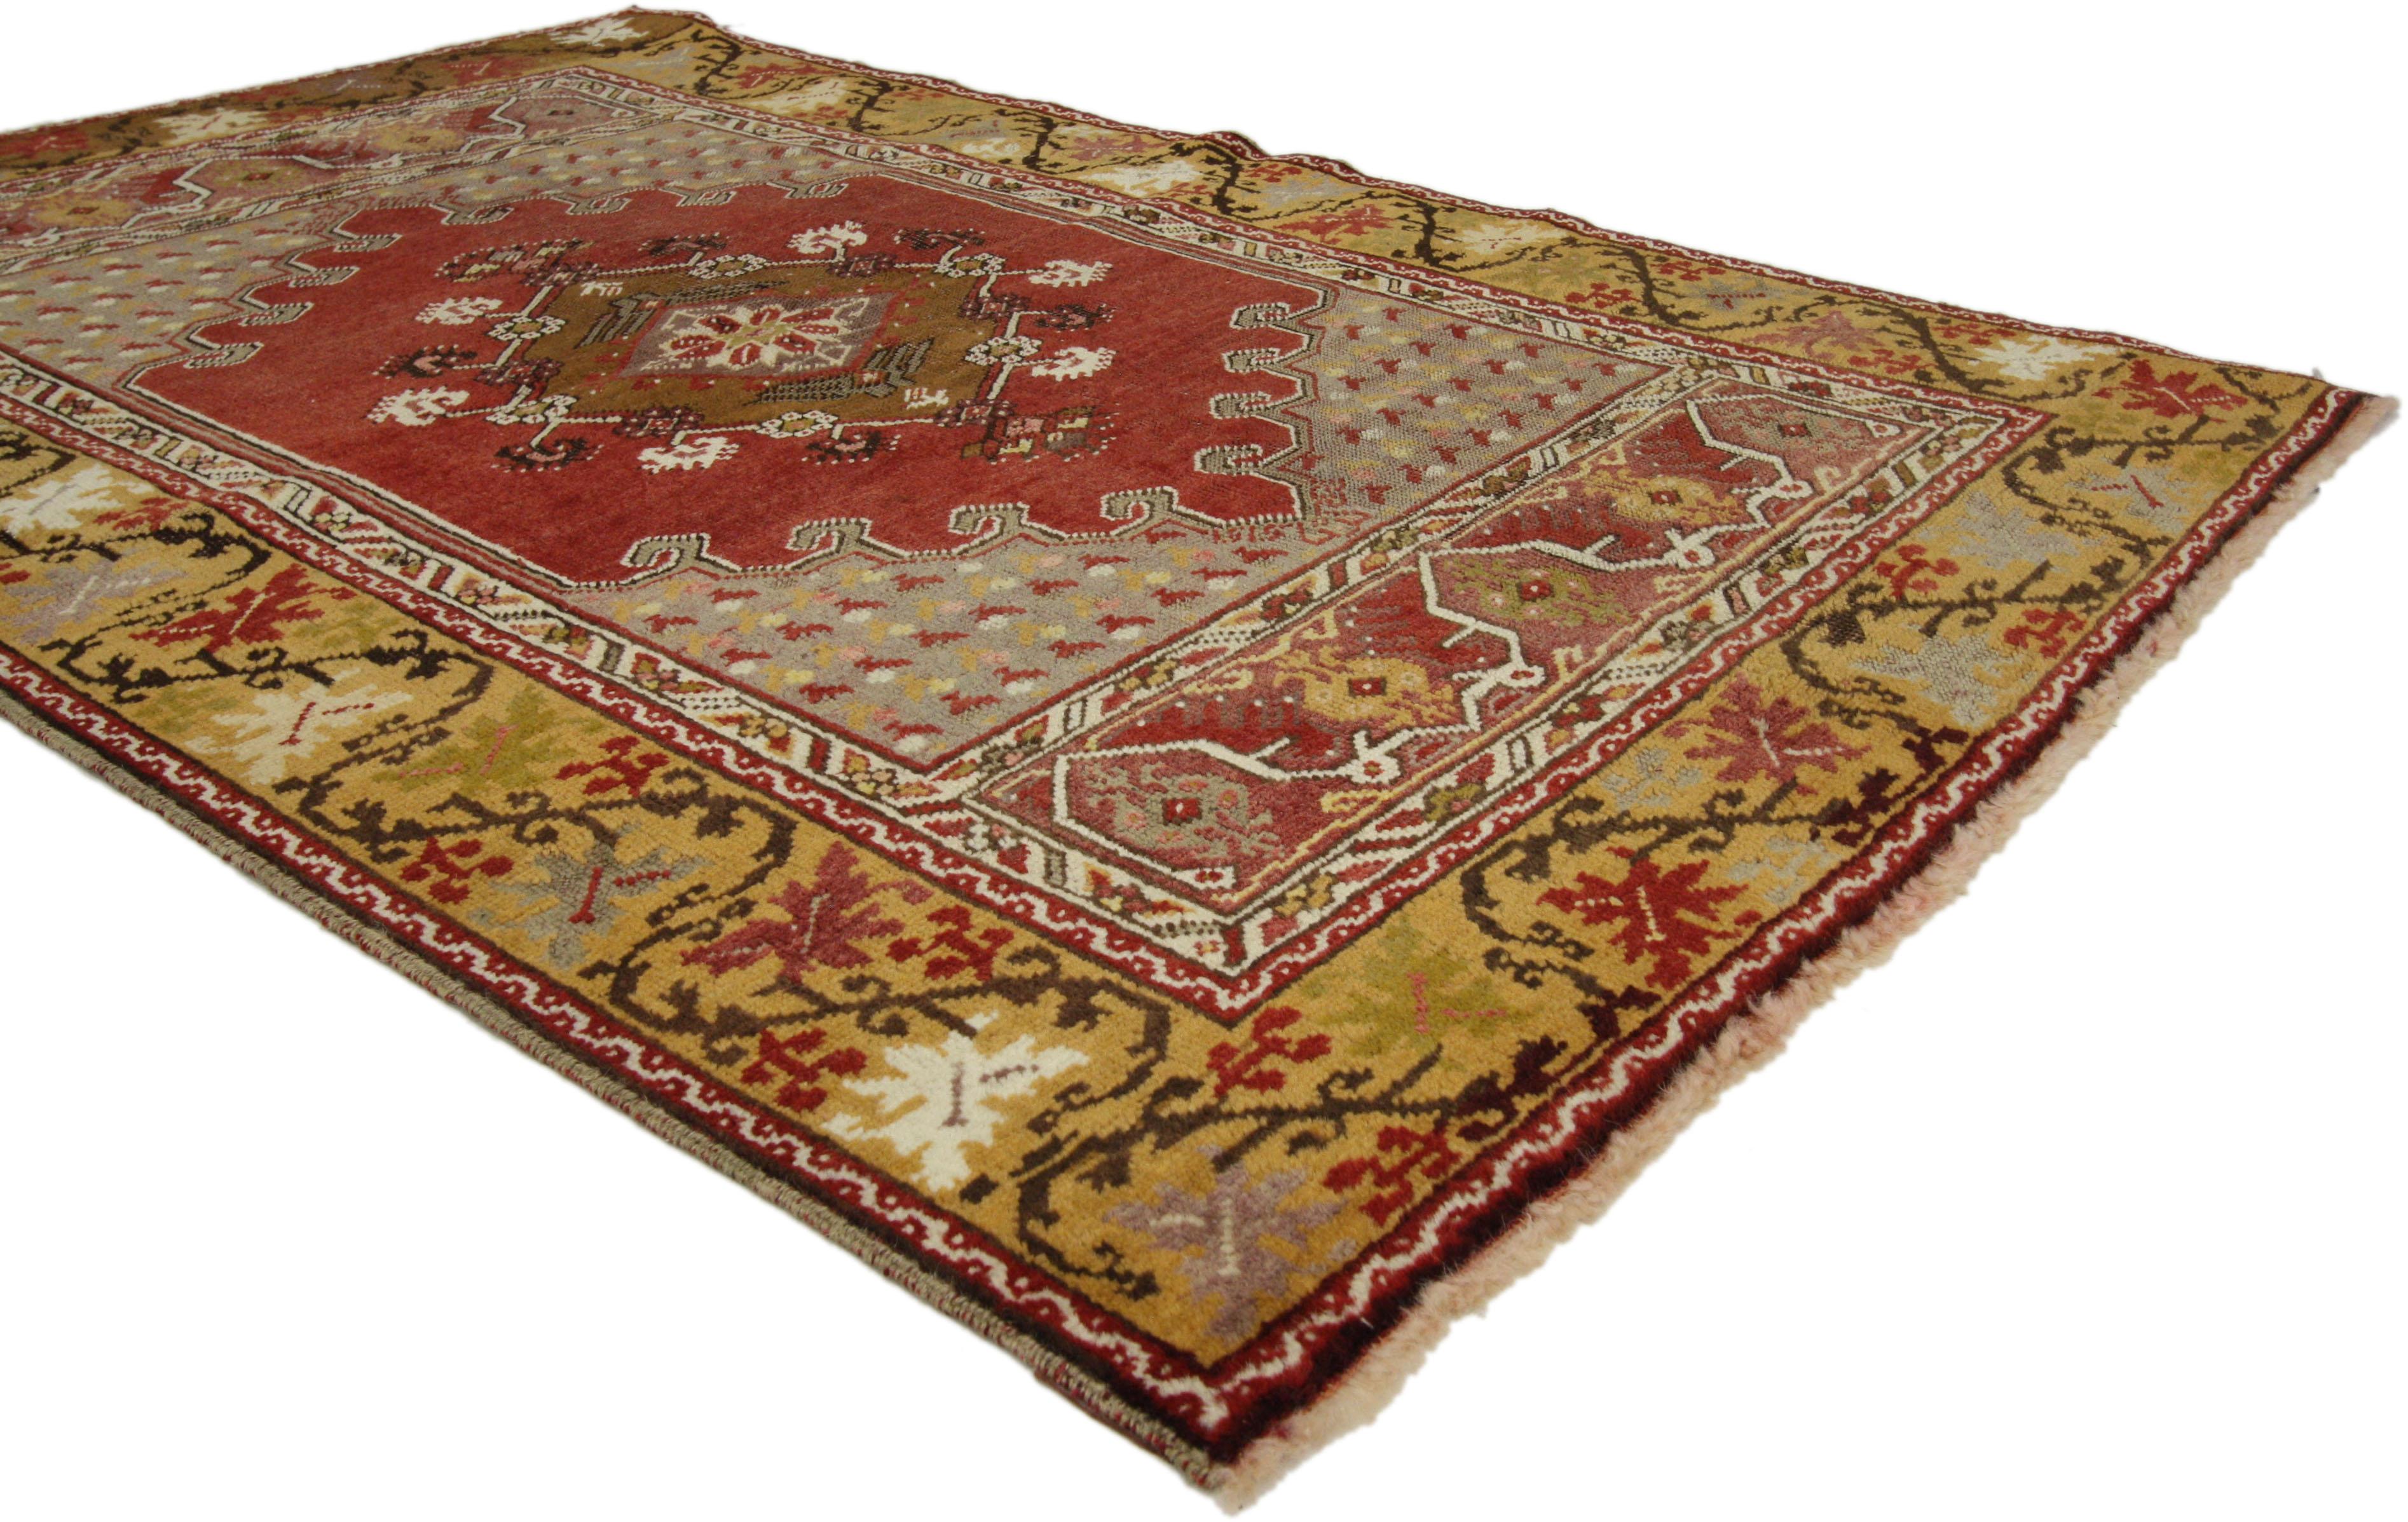 Vintage Turkish Oushak Rug, Entry or Foyer Rug In Good Condition For Sale In Dallas, TX